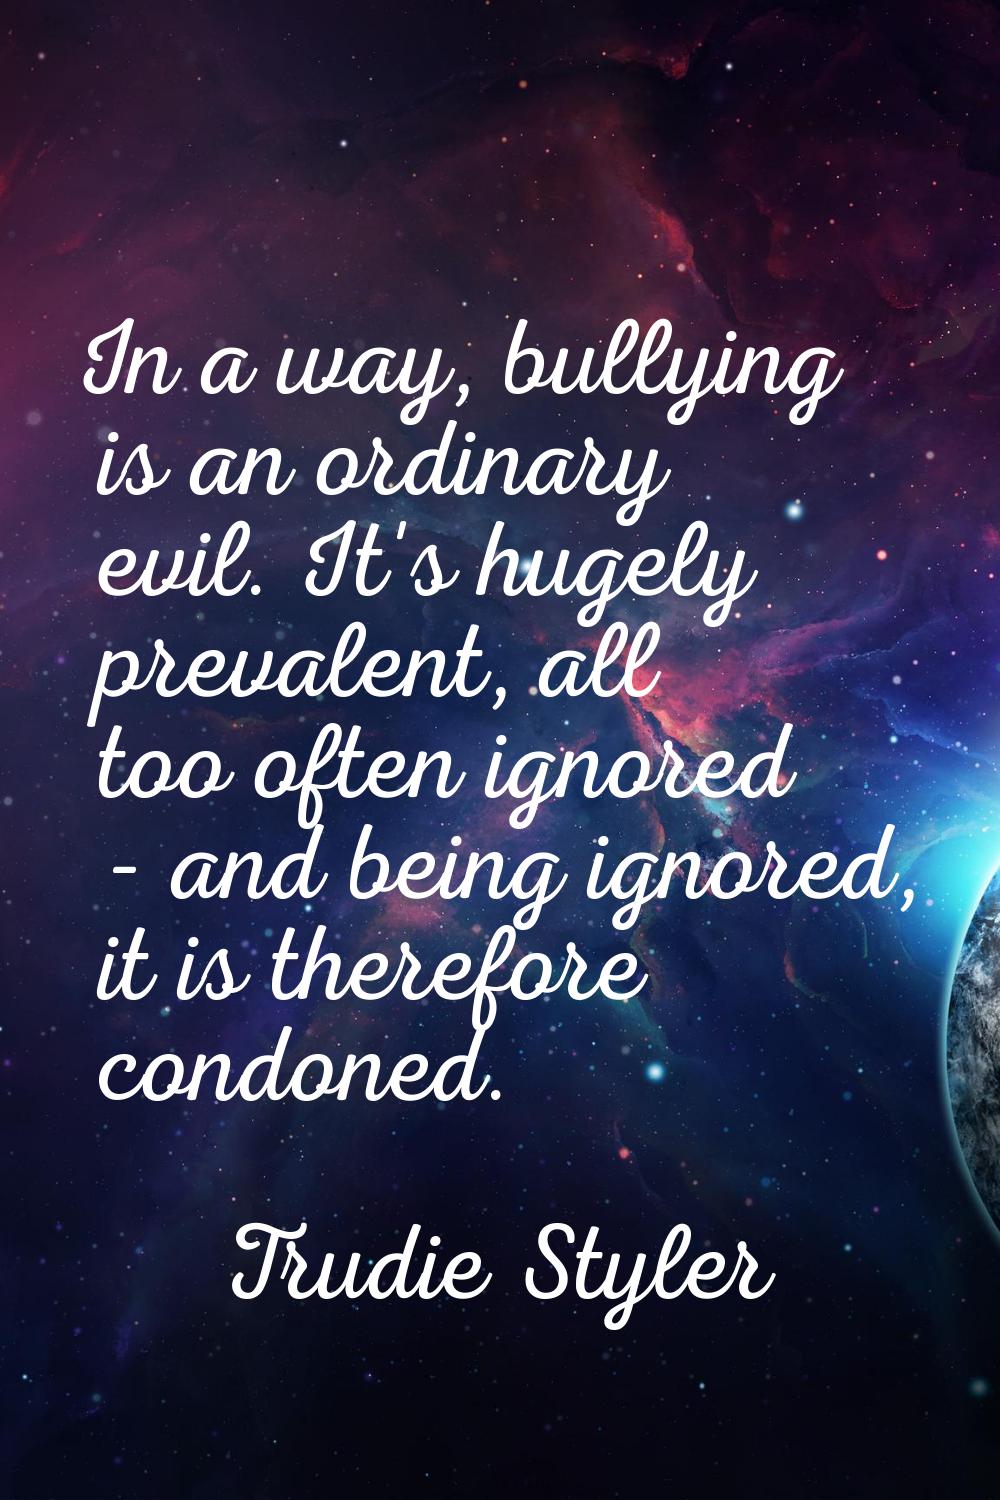 In a way, bullying is an ordinary evil. It's hugely prevalent, all too often ignored - and being ig